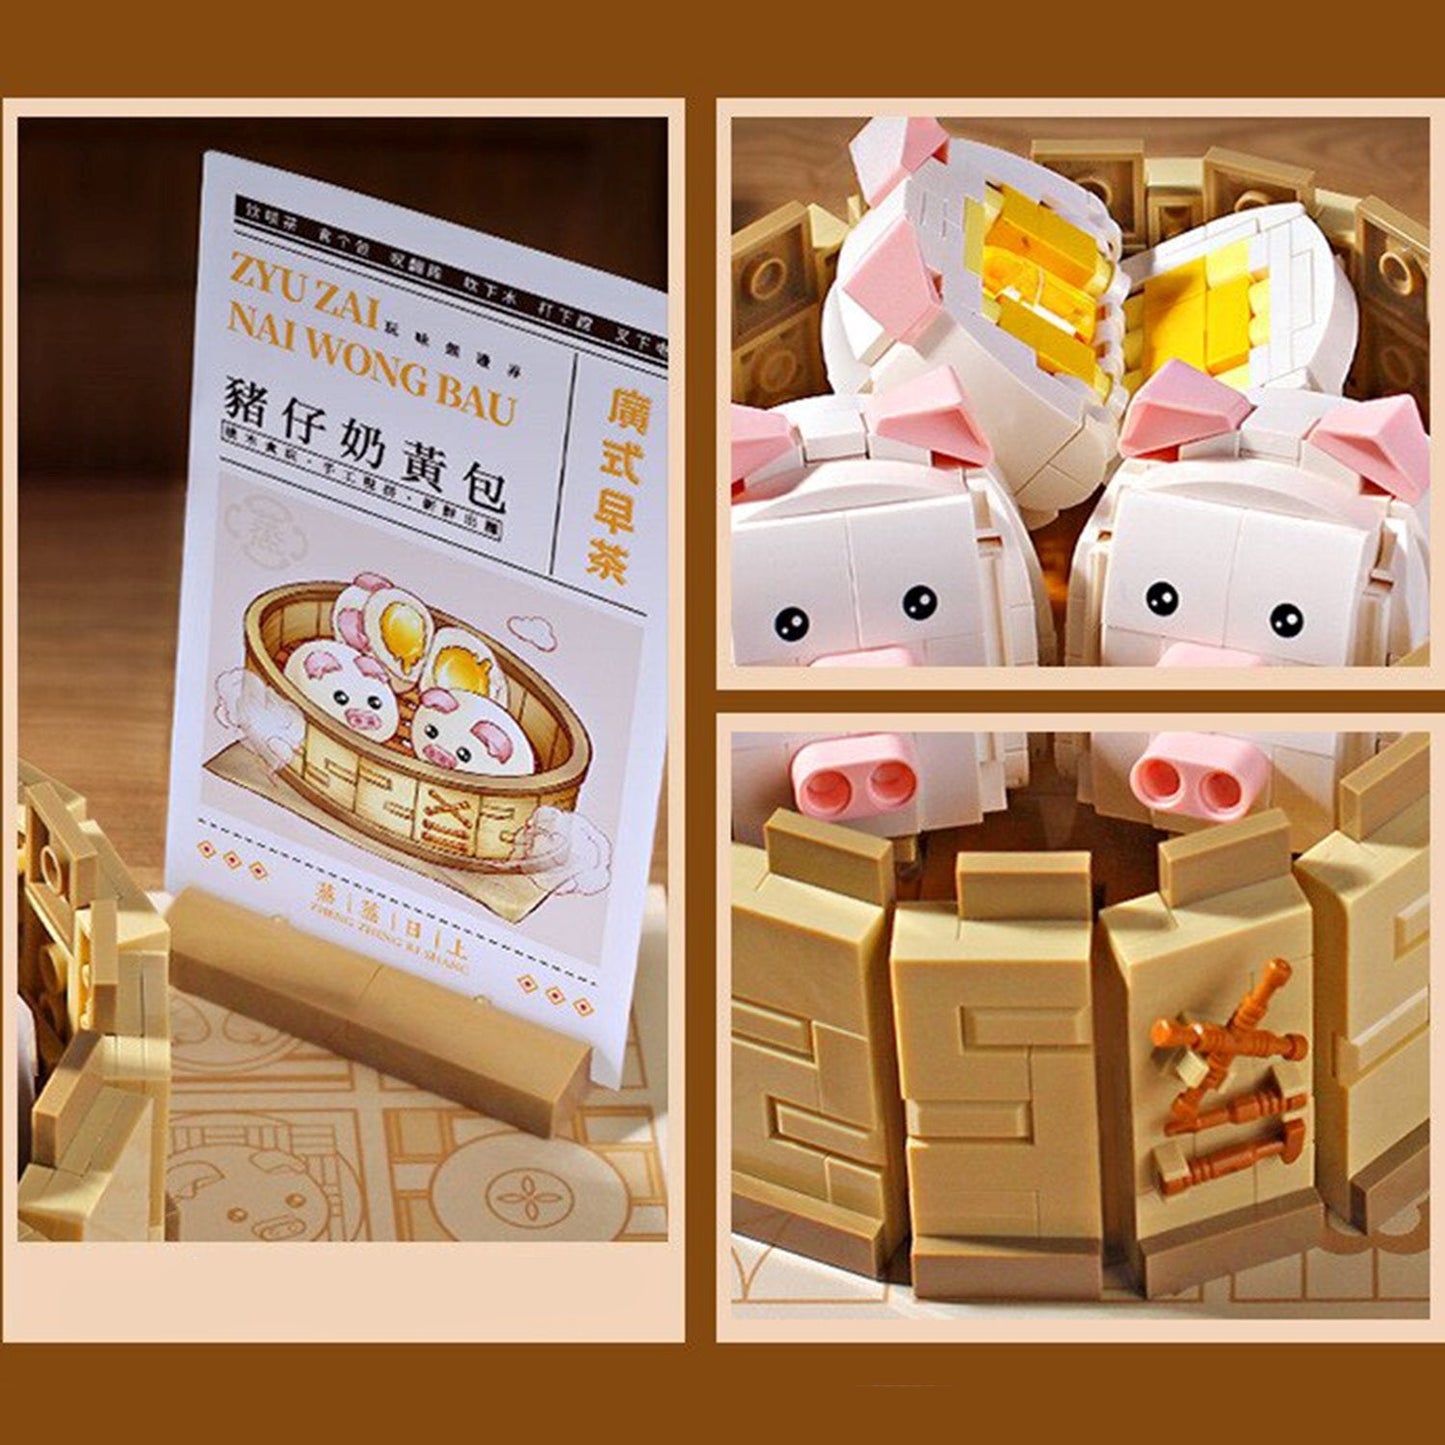 Chinese Dim Sum Nano Building Sets Collection | NEW